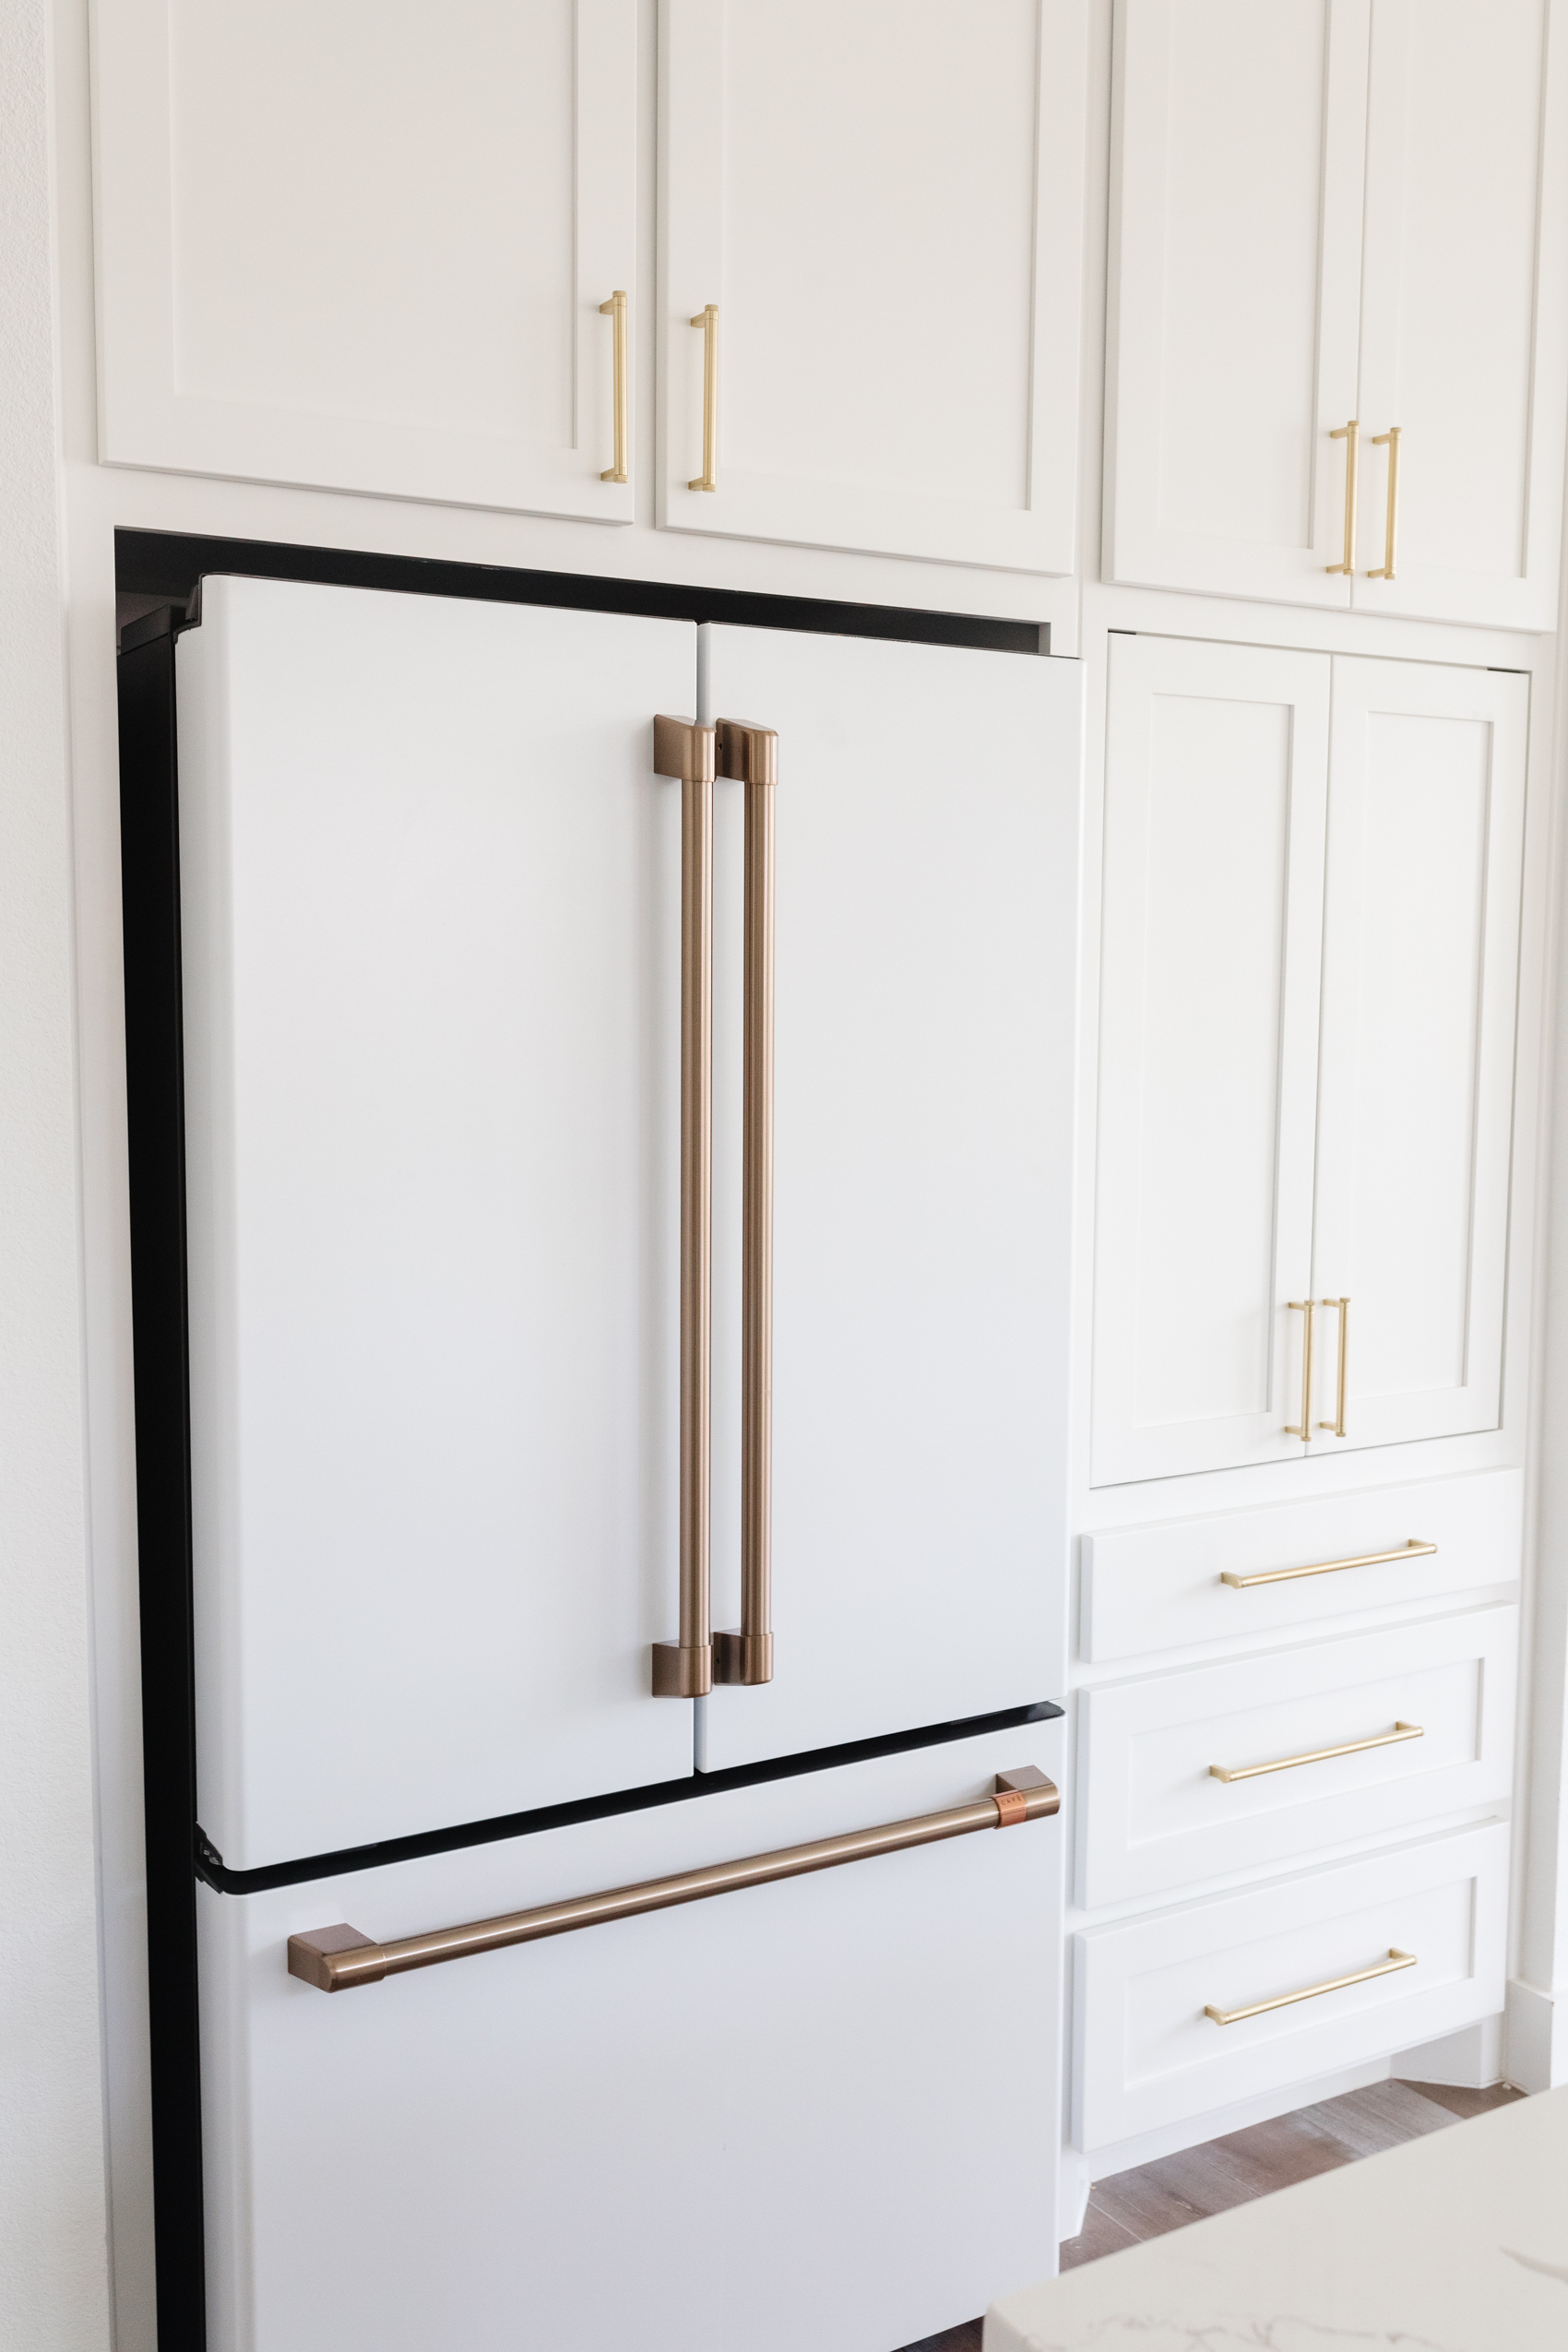 Cafe Appliances matte white refrigerator with brushed bronze handles in a white kitchen with shaker cabinets and brass hardware